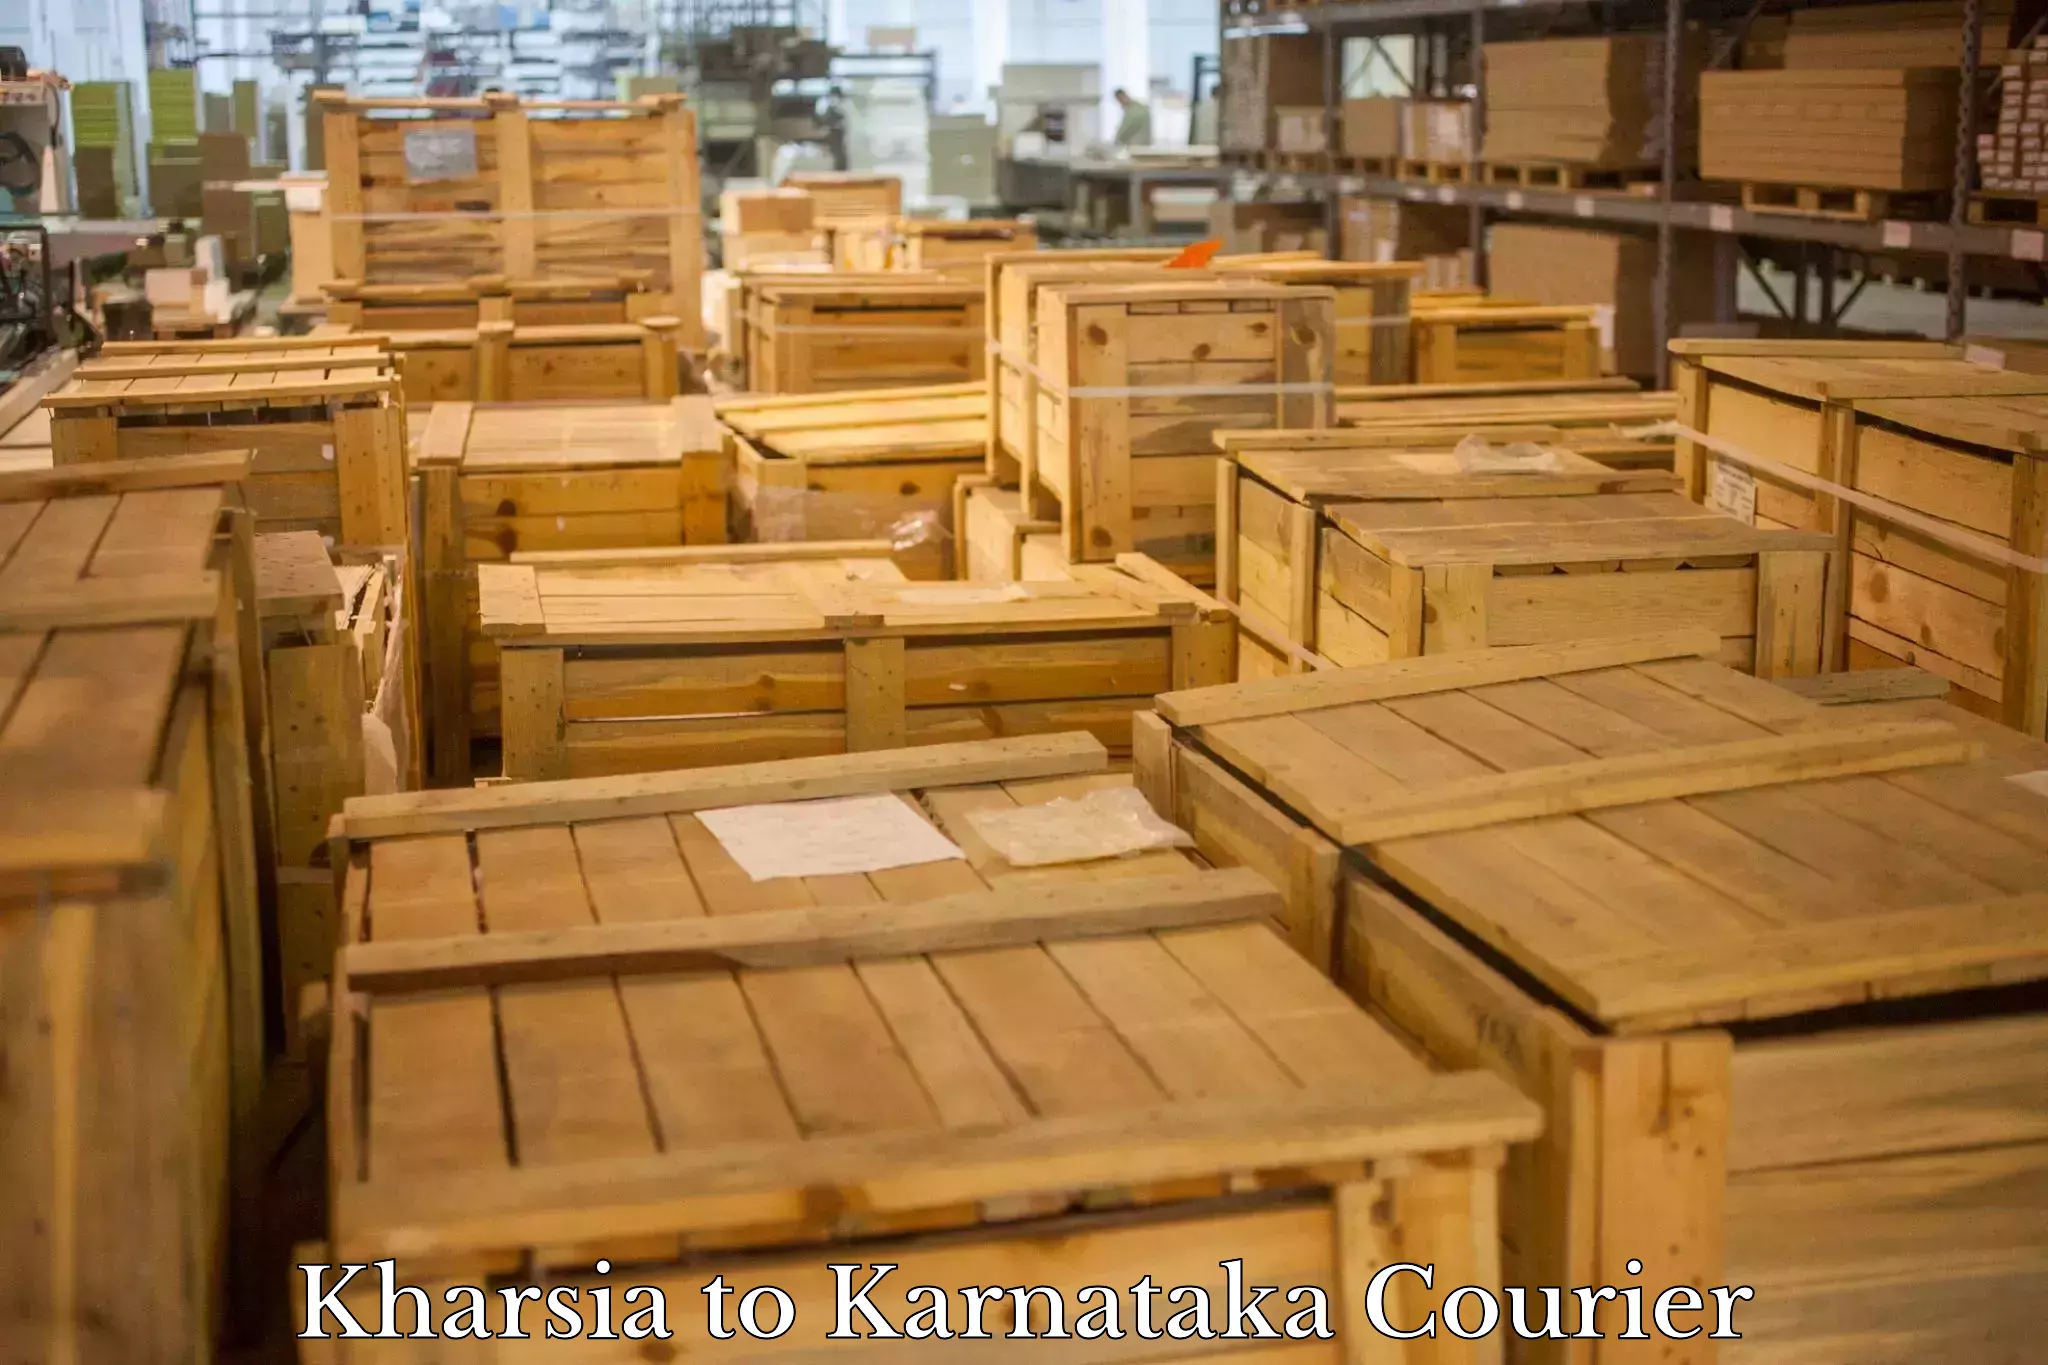 Express package handling Kharsia to Mangalore Port